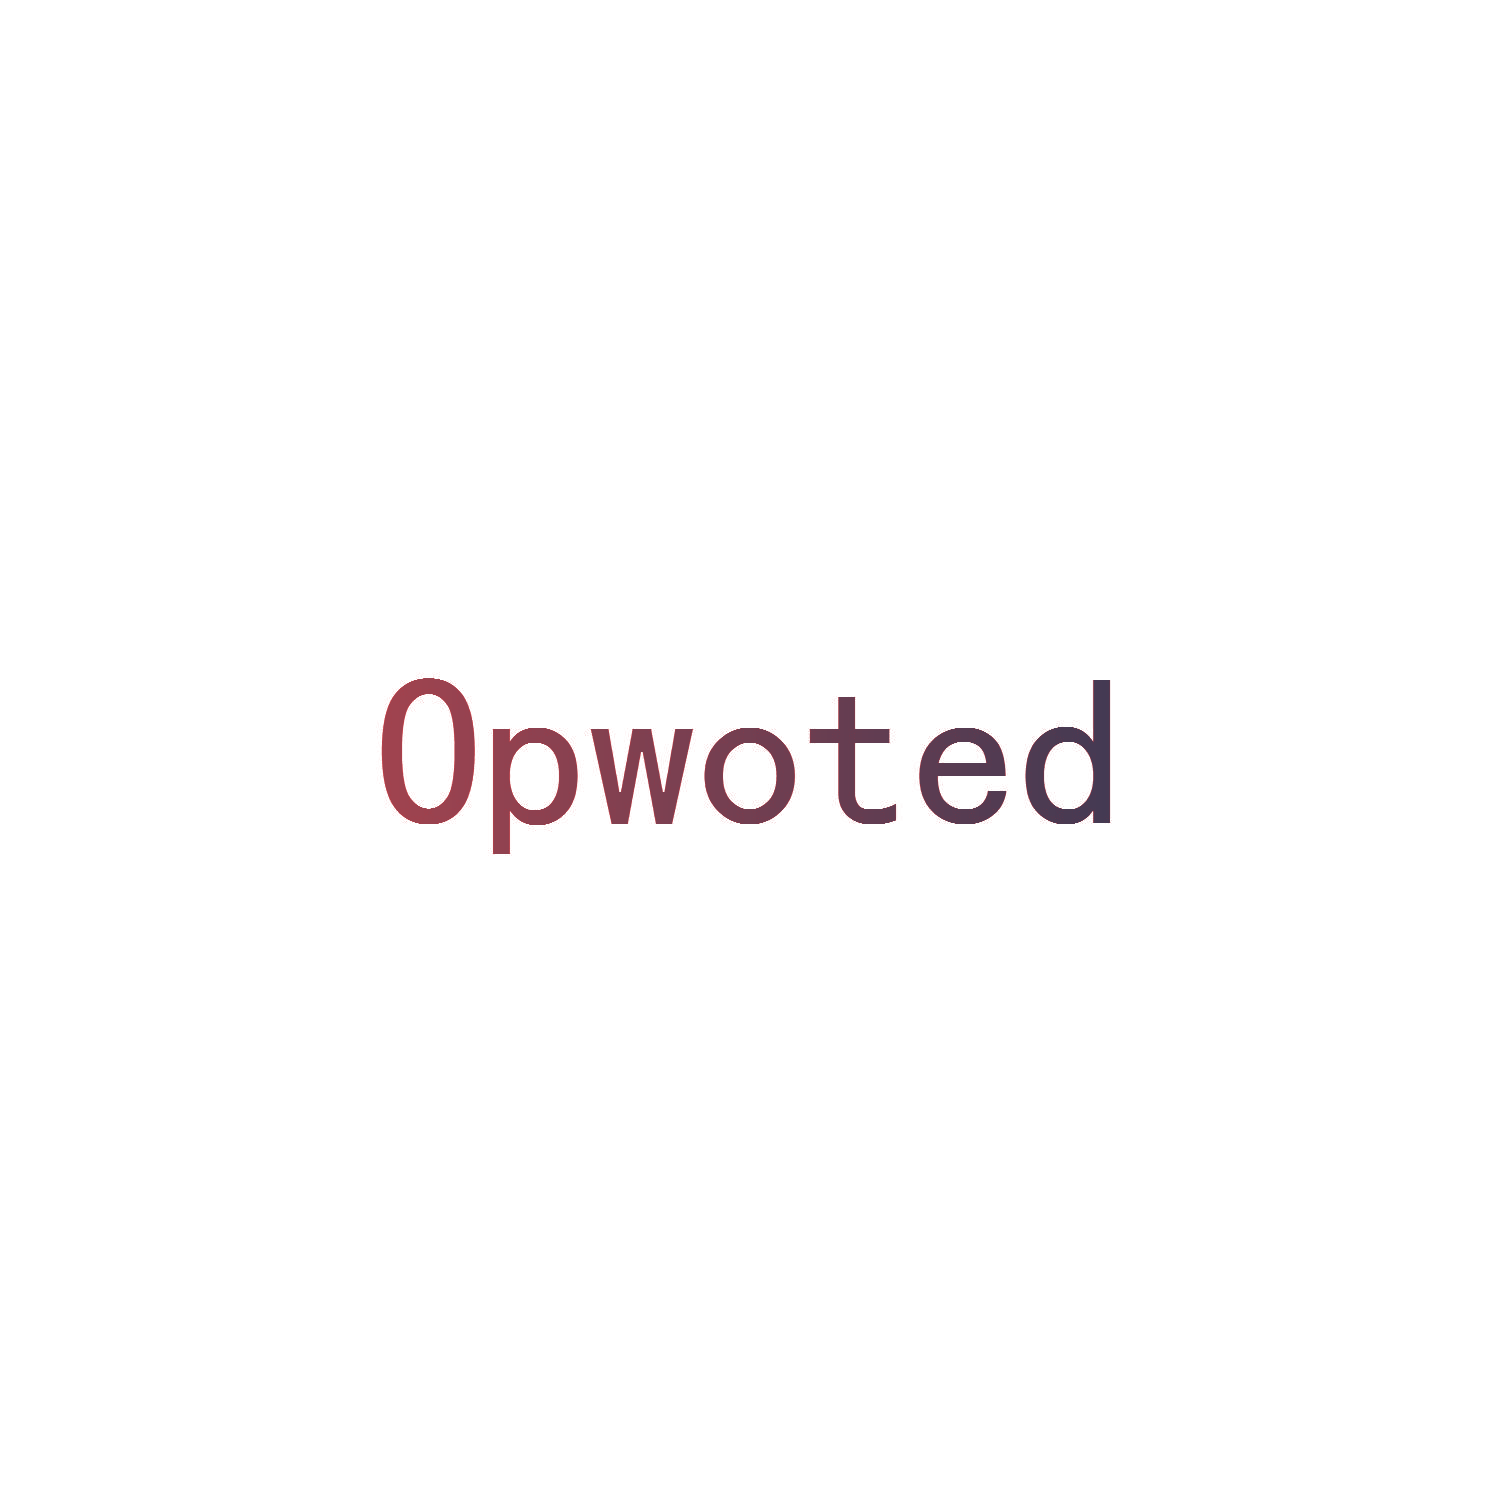 OPWOTED